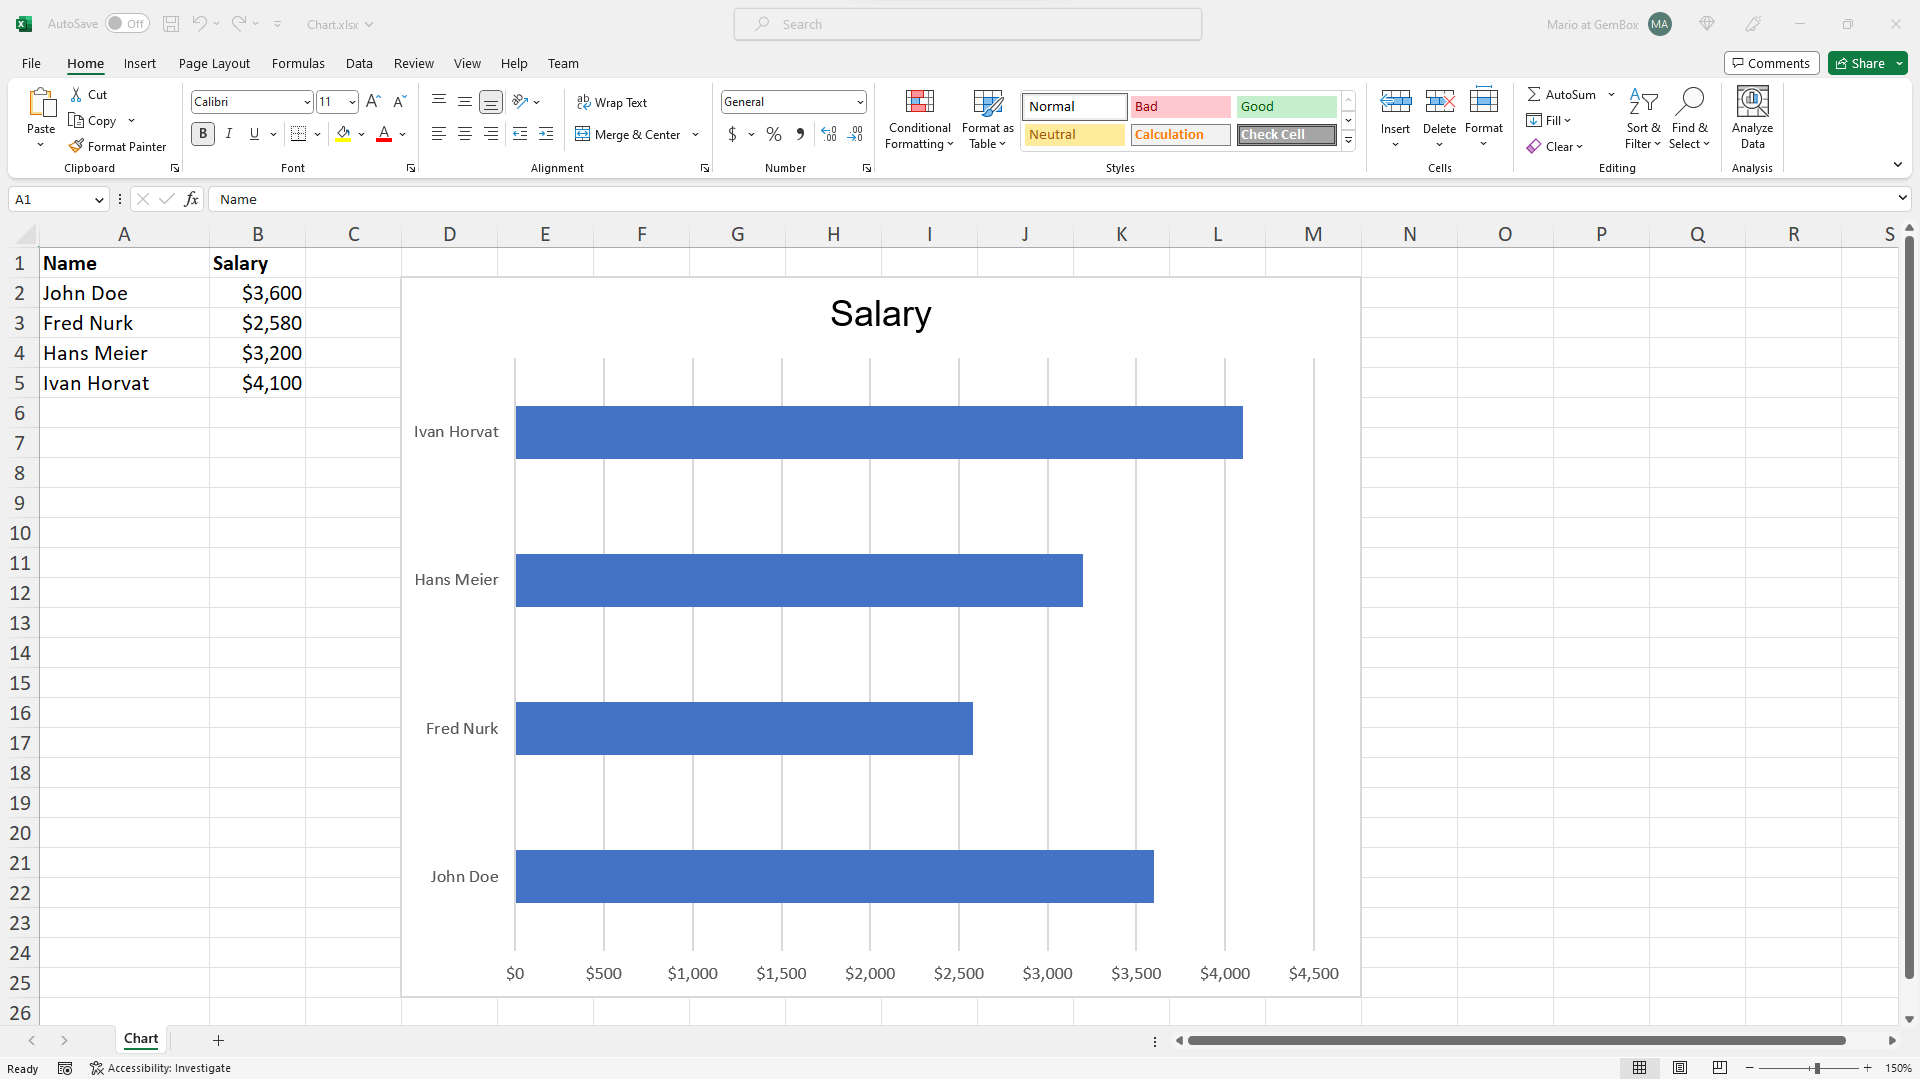 Excel chart created in C# and VB.NET